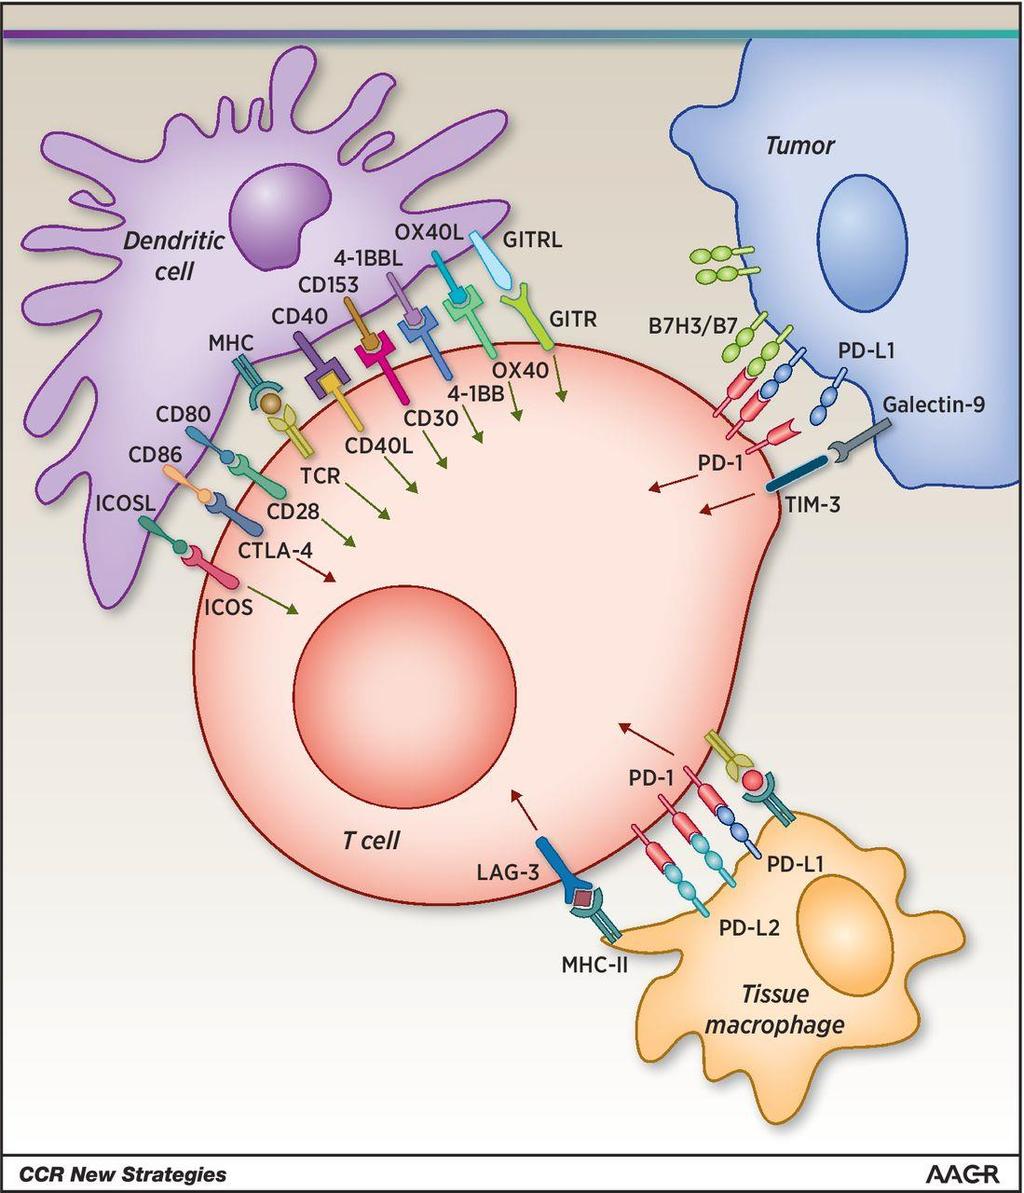 T lymphocytes are activated and negatively regulated by immune checkpoints.